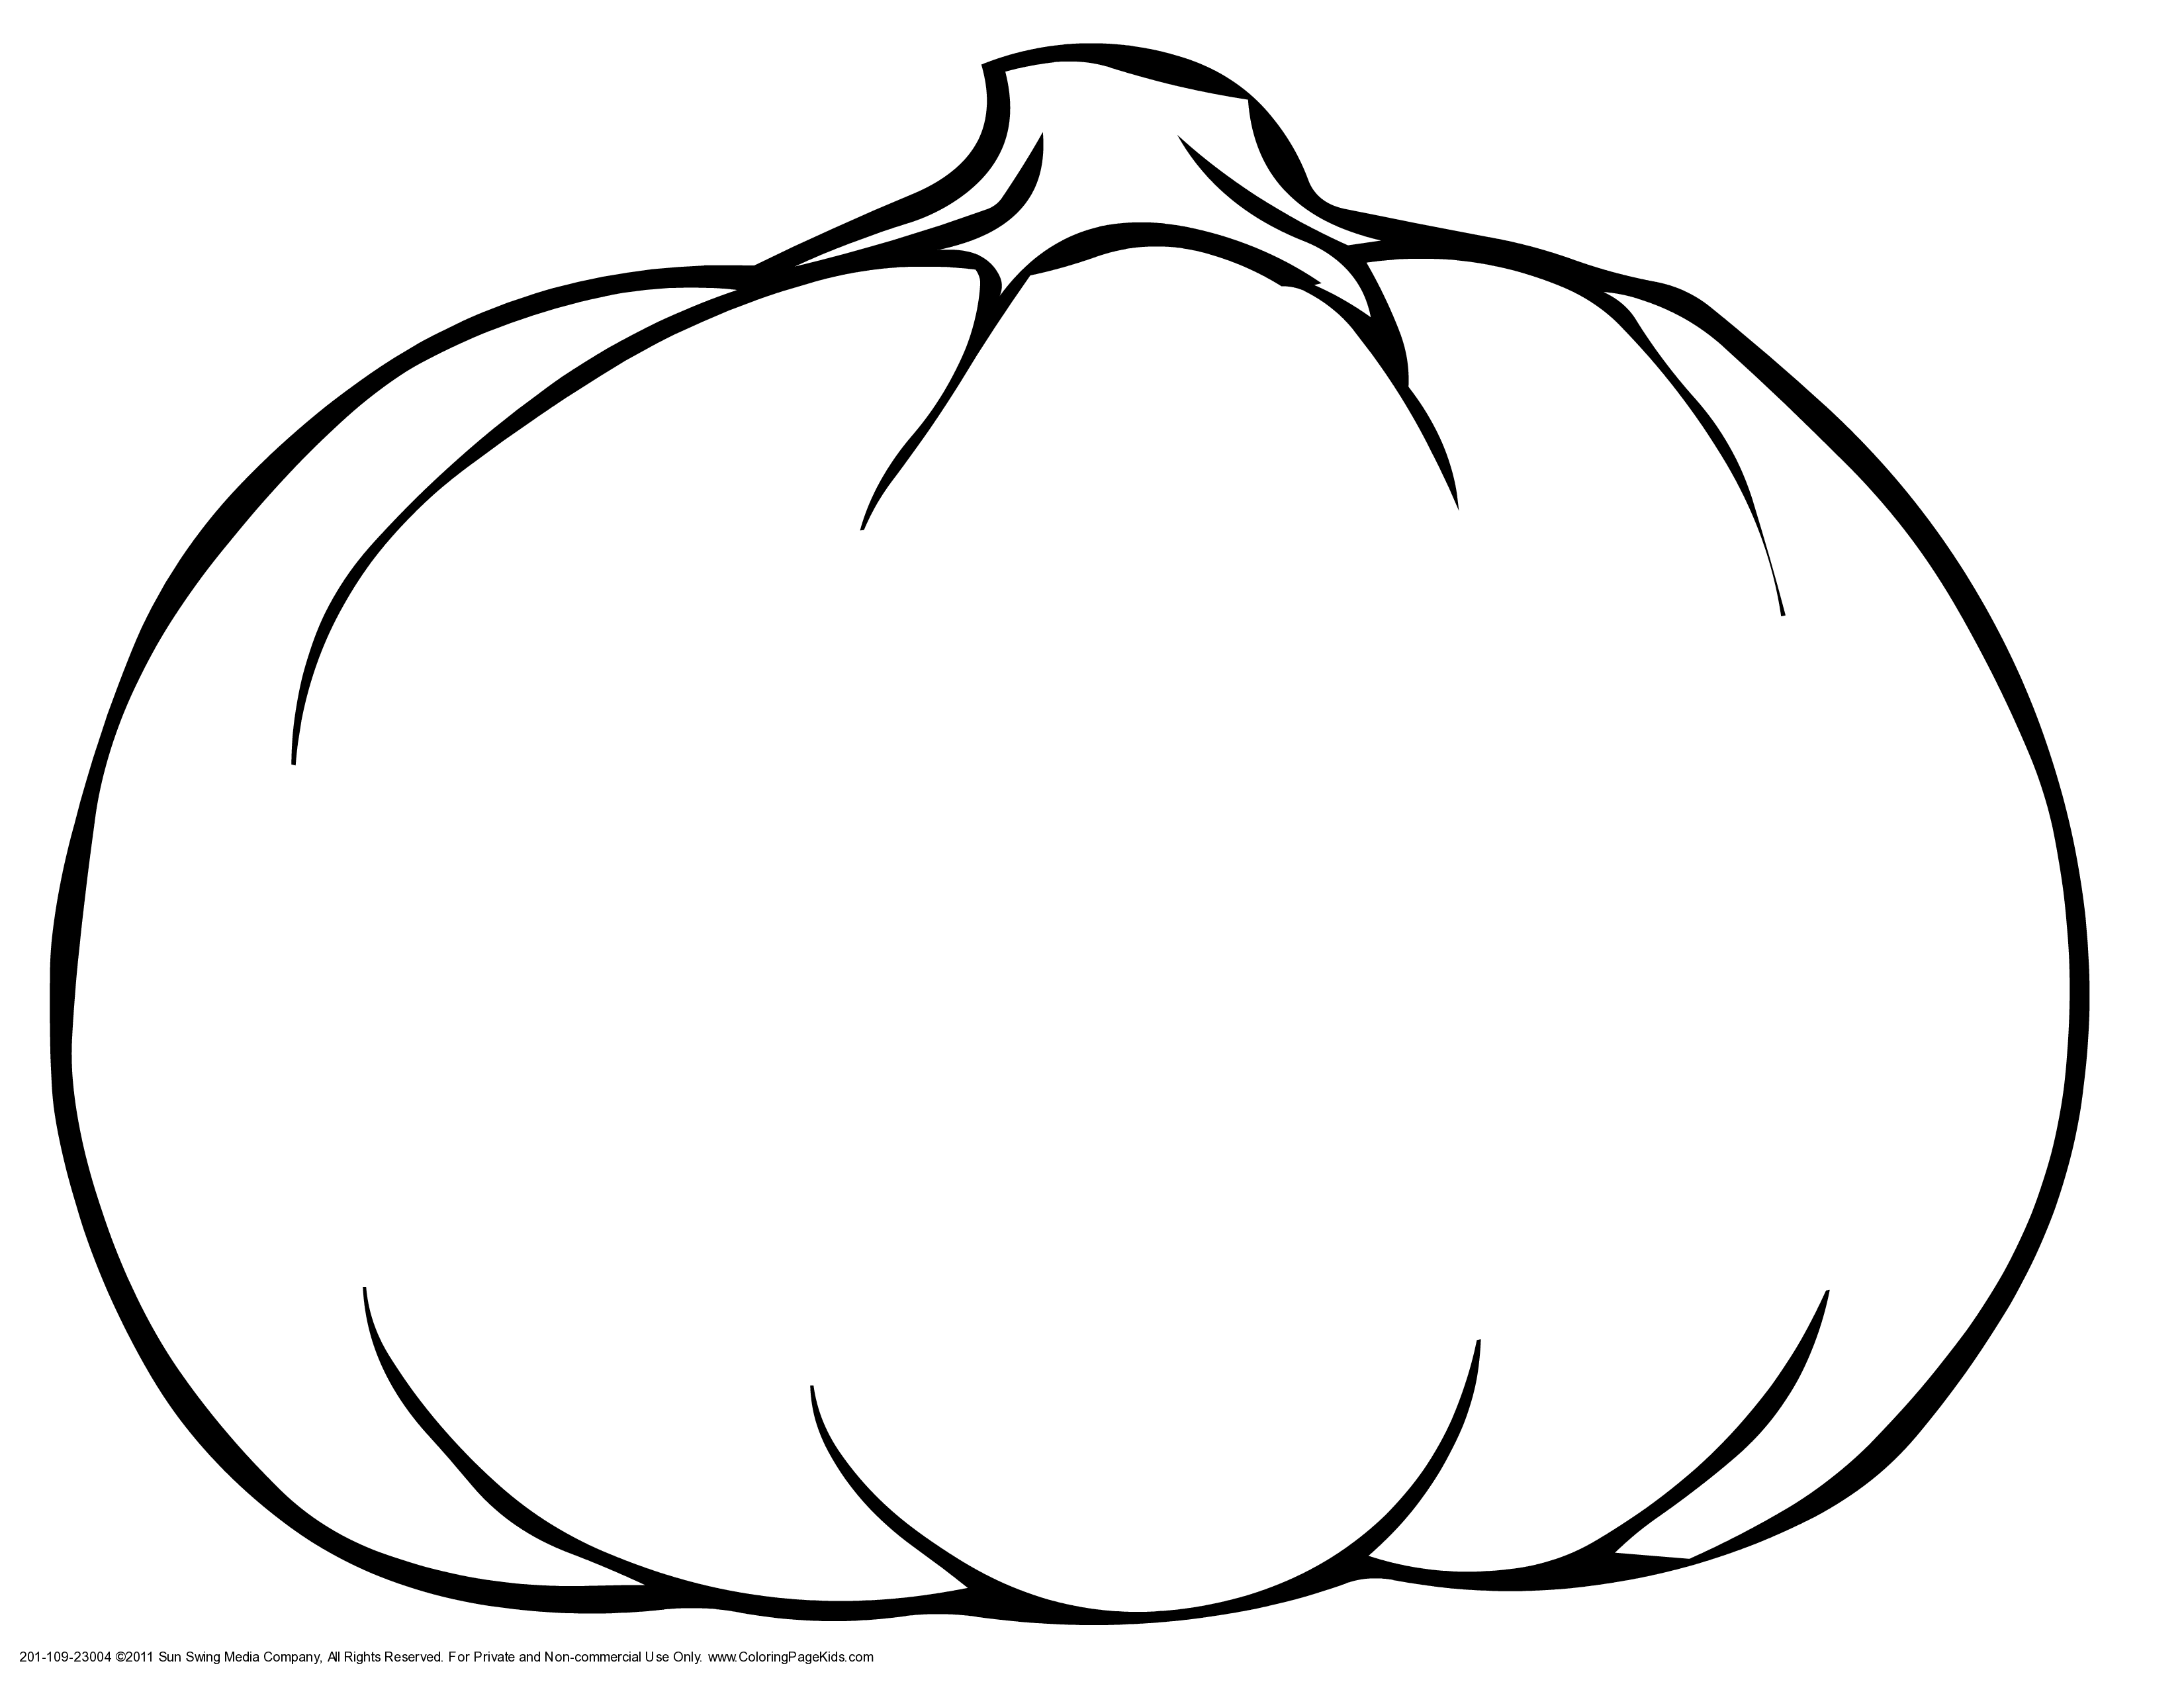 printable pumpkin pictures halloween pumpkin to color festival collections printable pictures pumpkin 